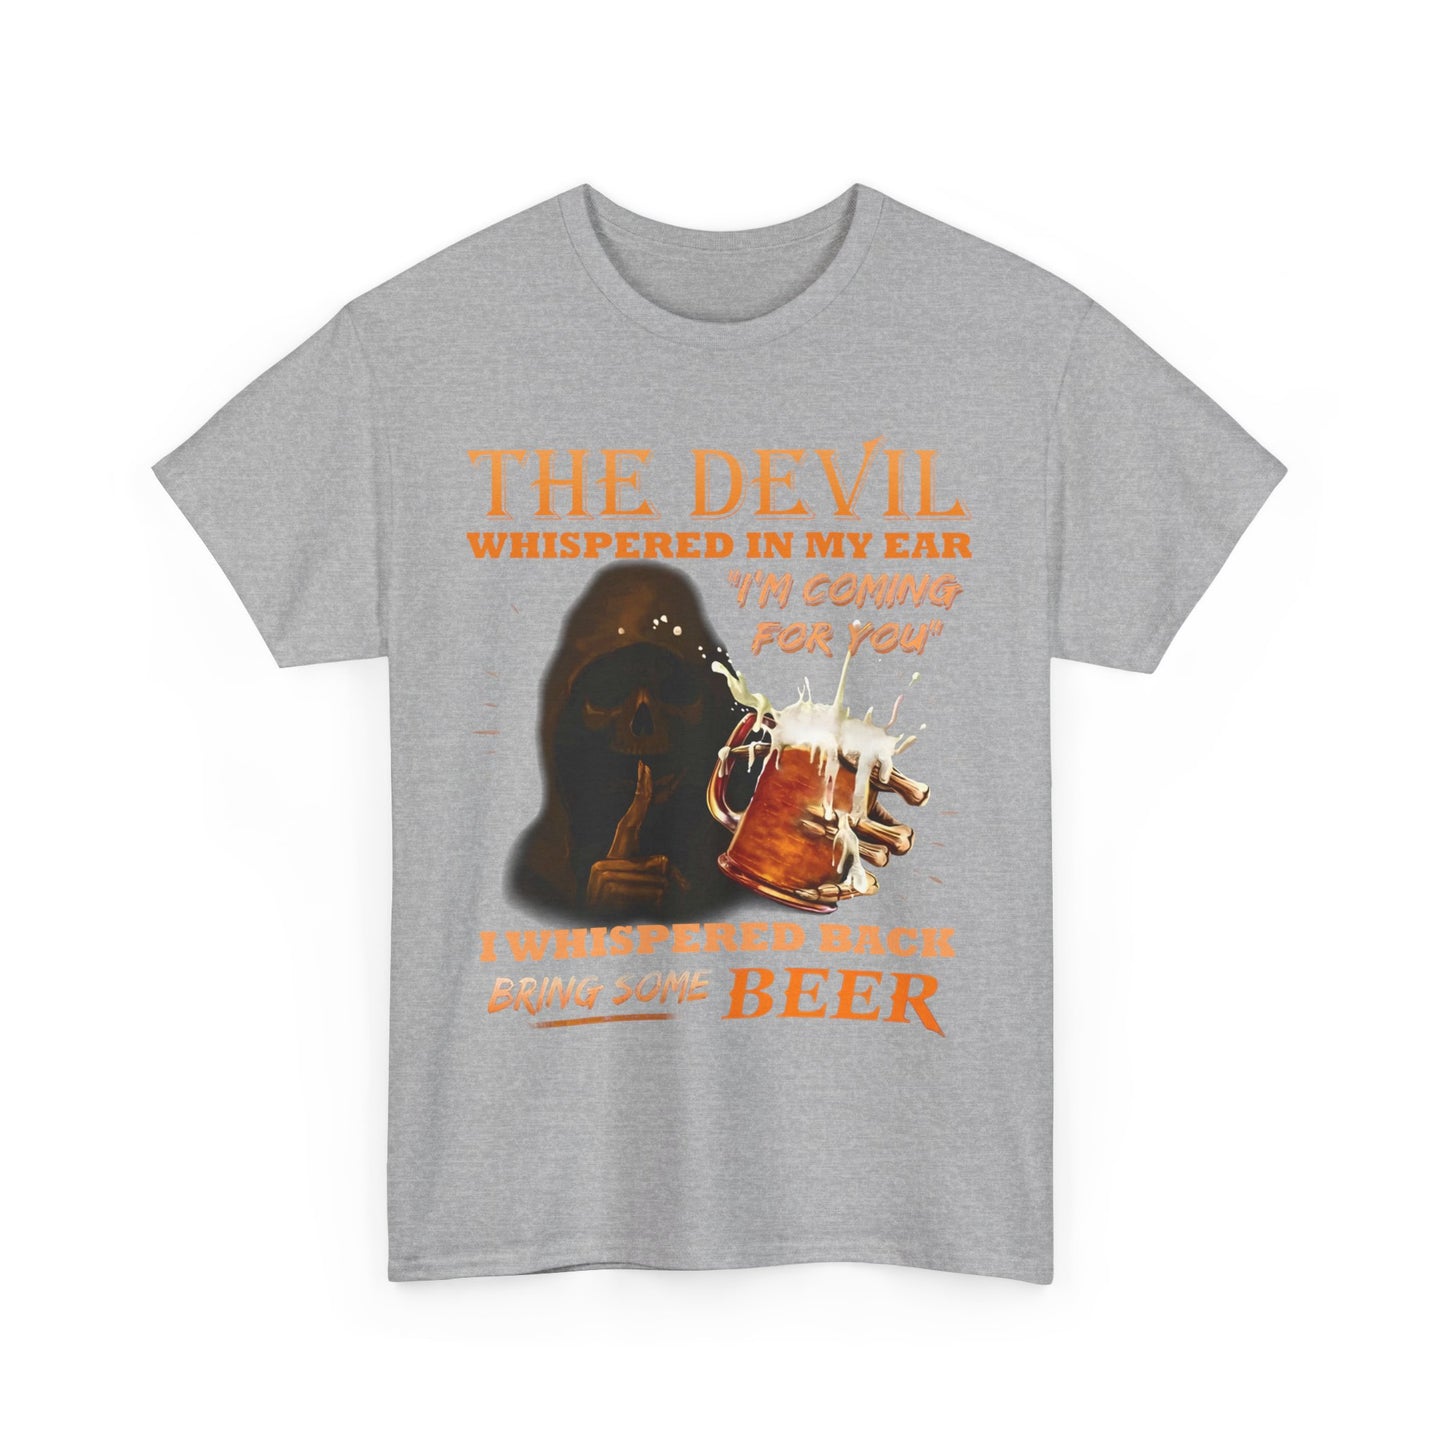 Bring Me Some Beer High Quality Printed Unisex Heavy Cotton T-shirt